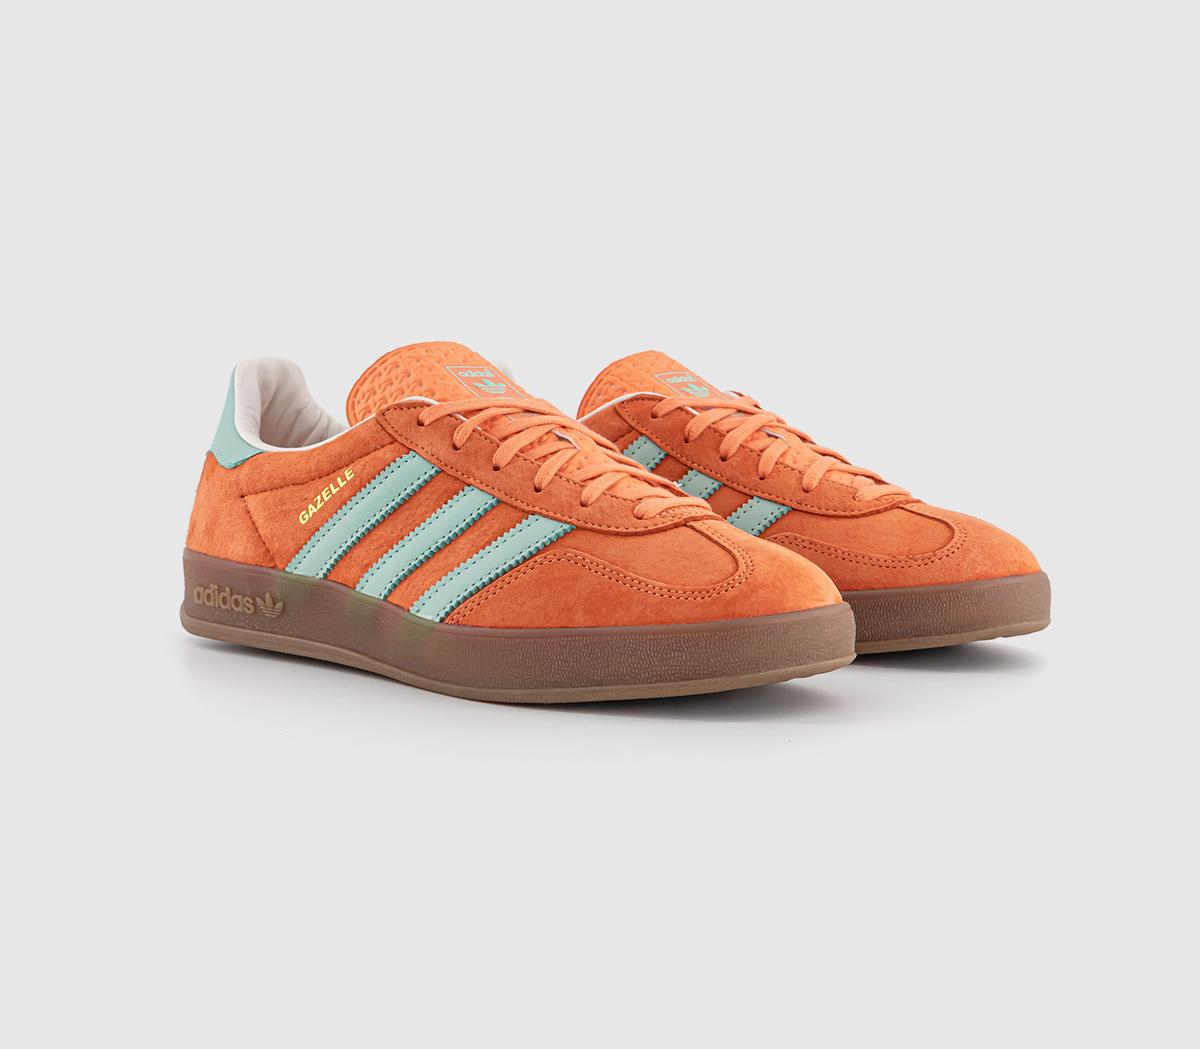 Adidas Gazelle Indoor Trainers Easy Orange Clear Mint Gum Red, 8.5